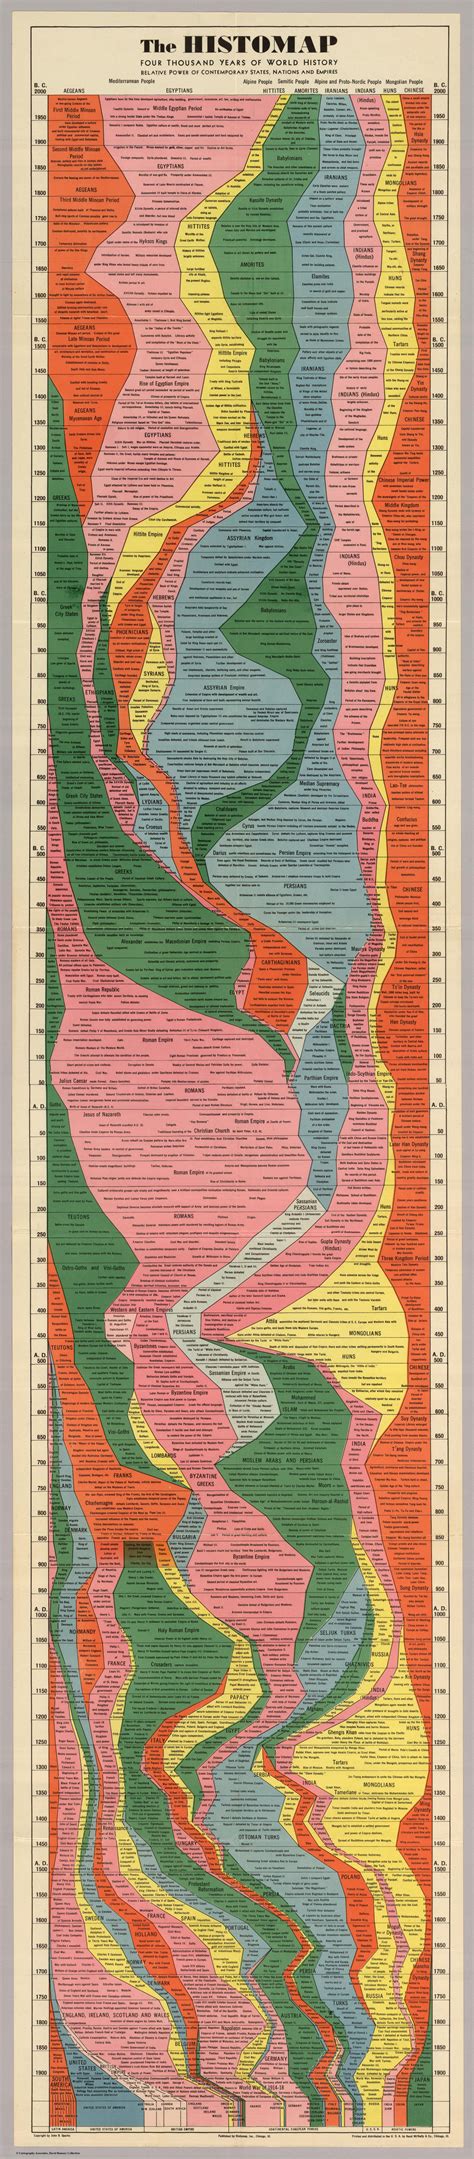 4,000-years-of-world-history-in-one-epic-chart-»-twistedsifter